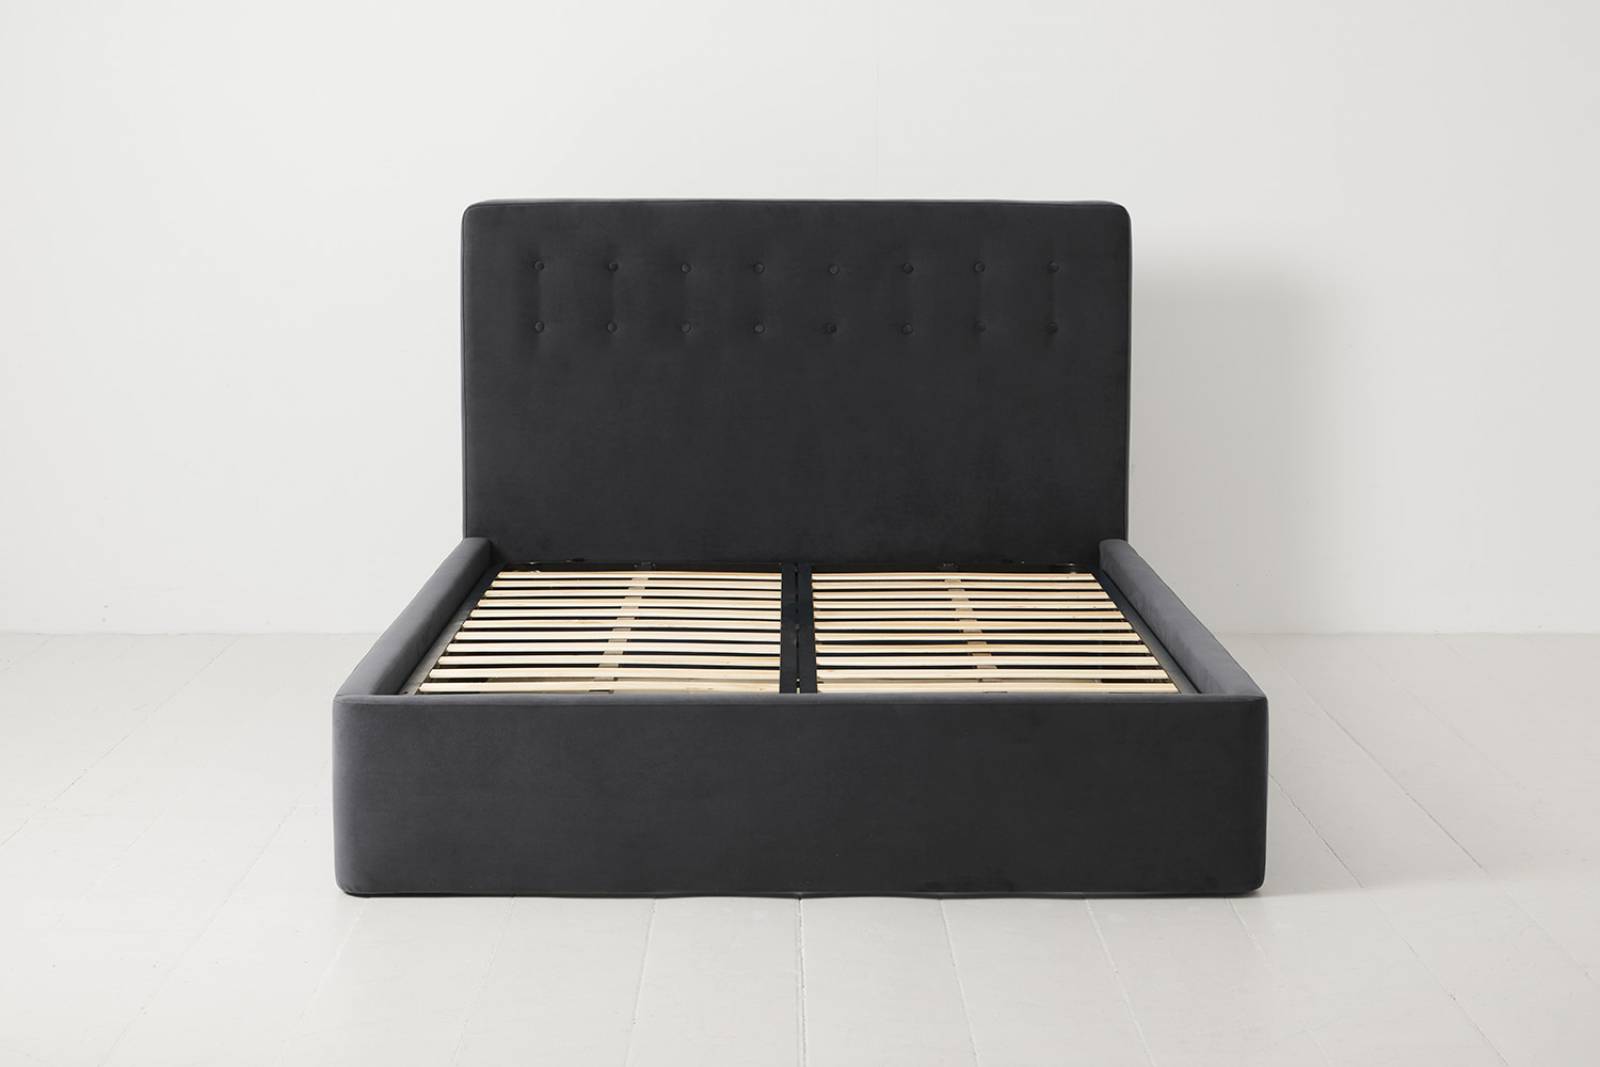 Swyft Bed 01 - Double Size Bed Frame - Velvet Charcoal